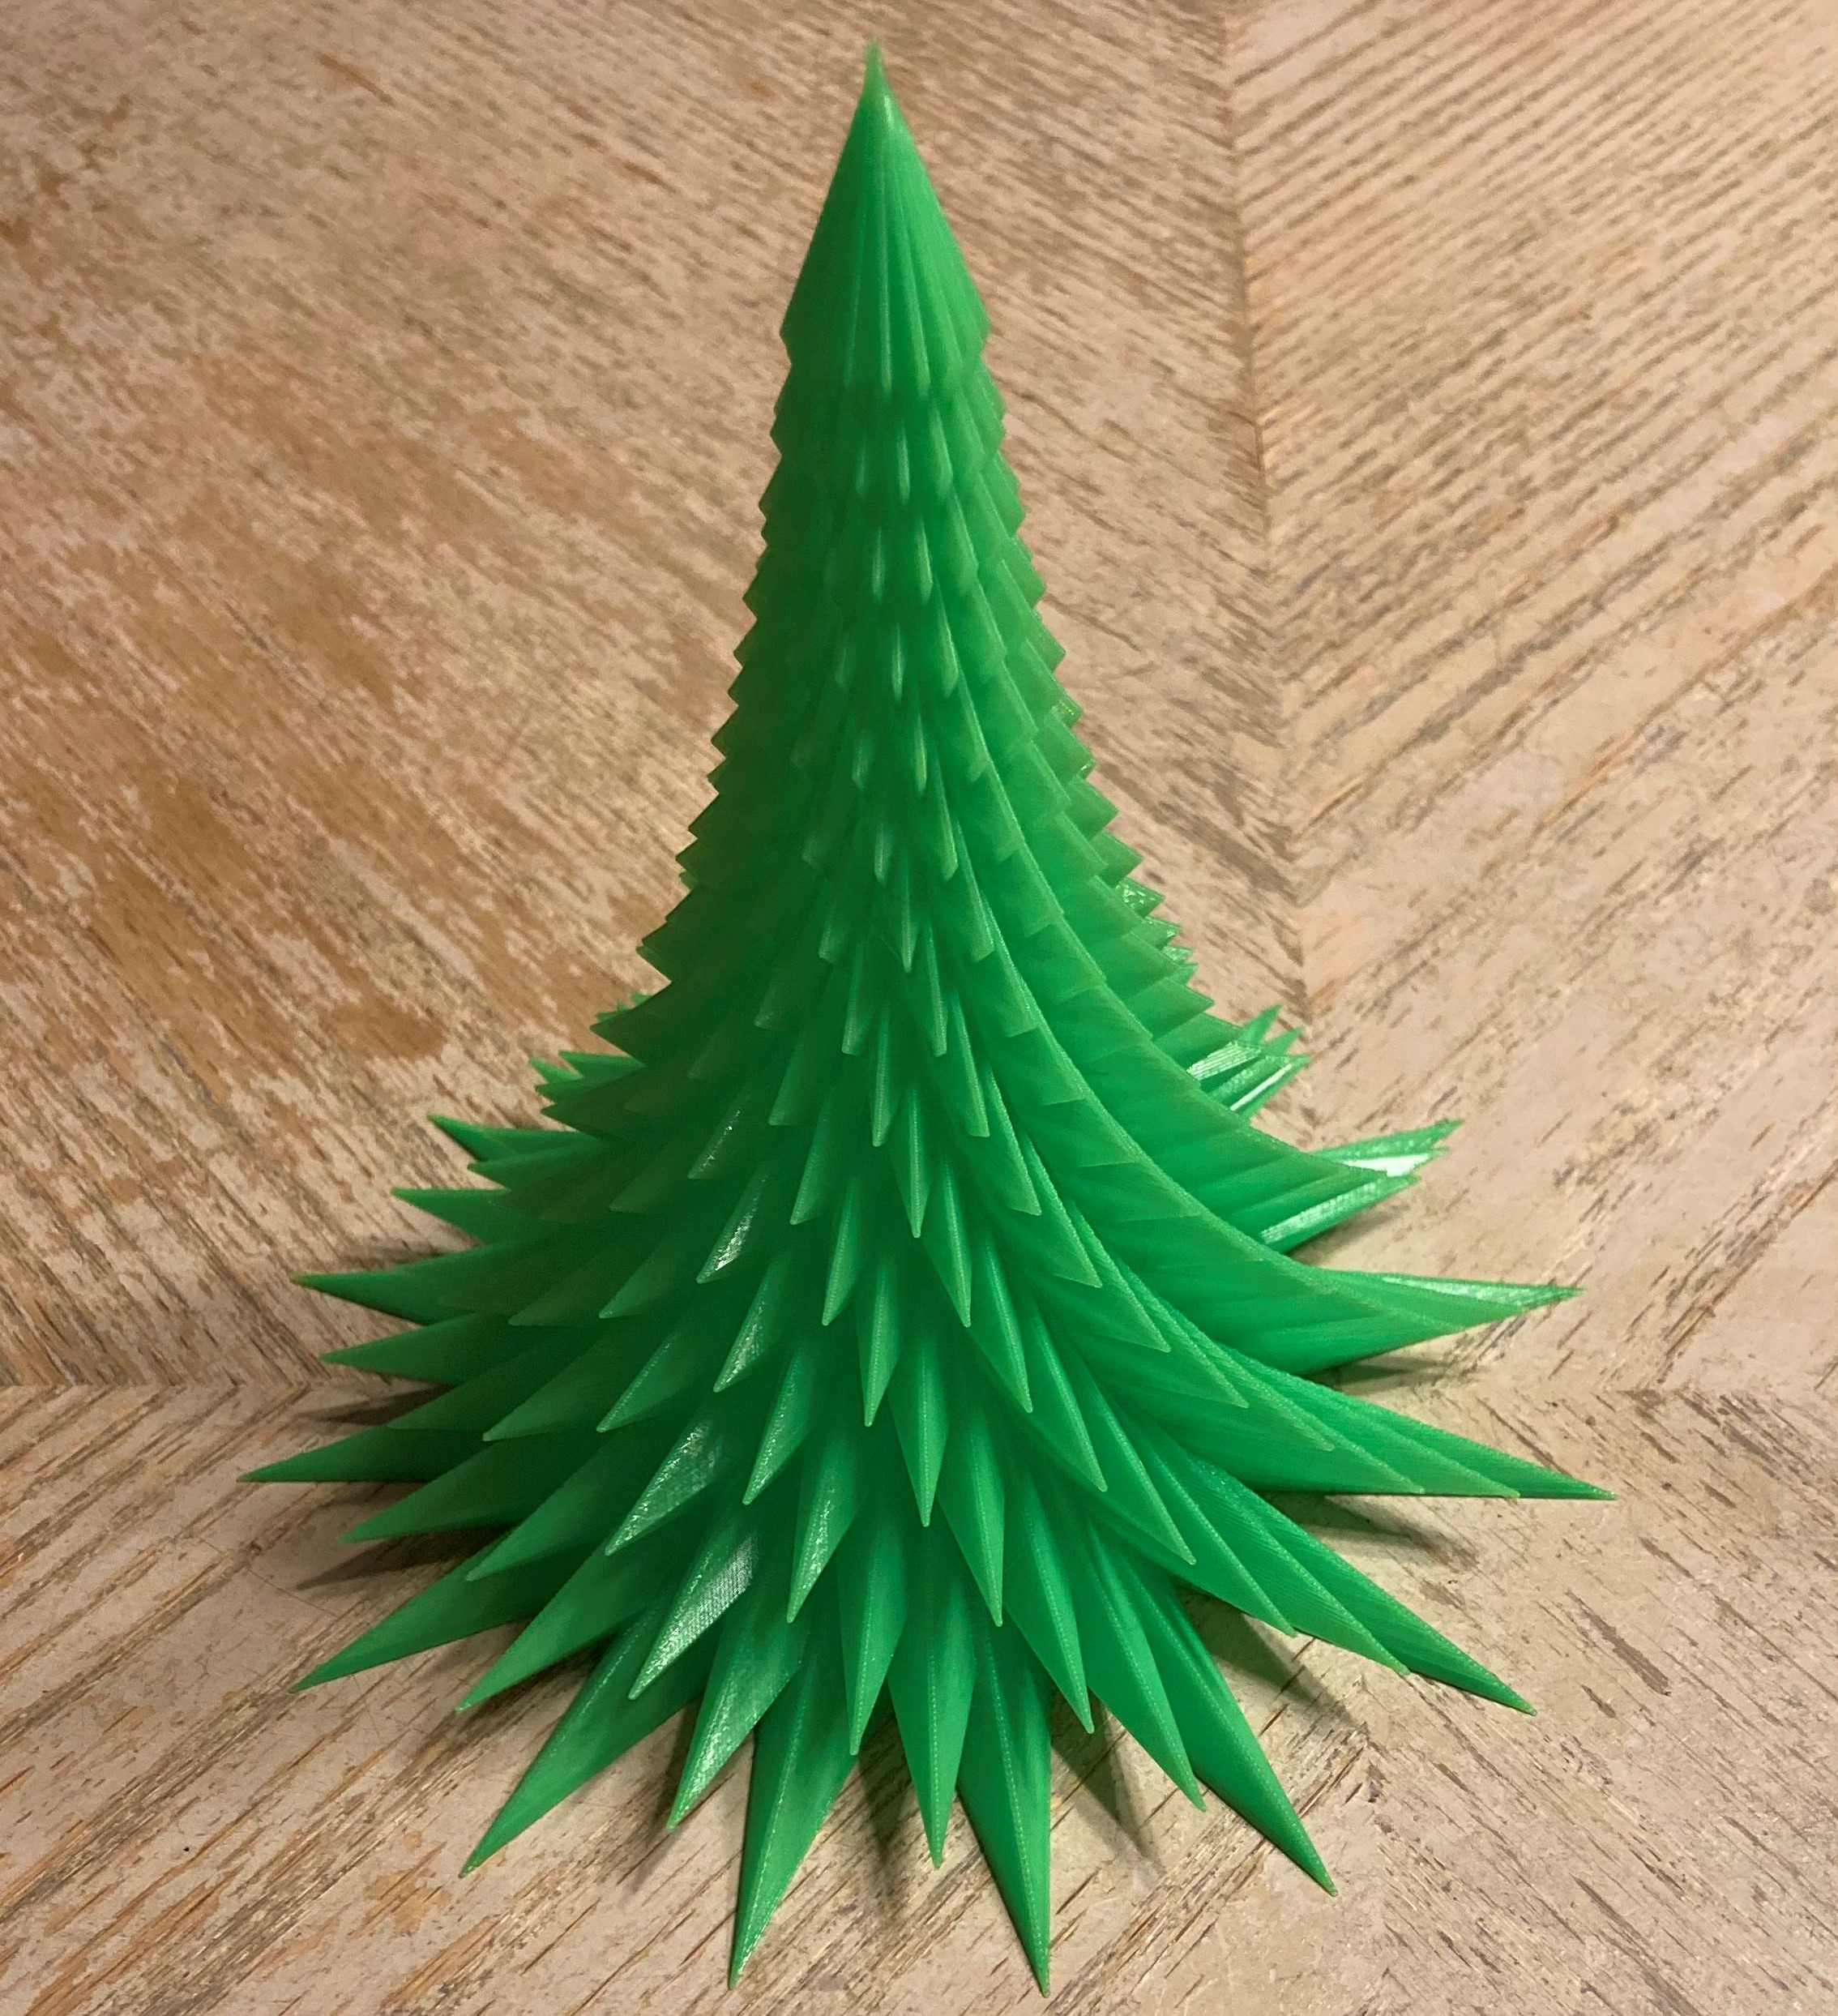 Spiky twisted vase mode Christmas tree by SnobbishGoose | Download free ...